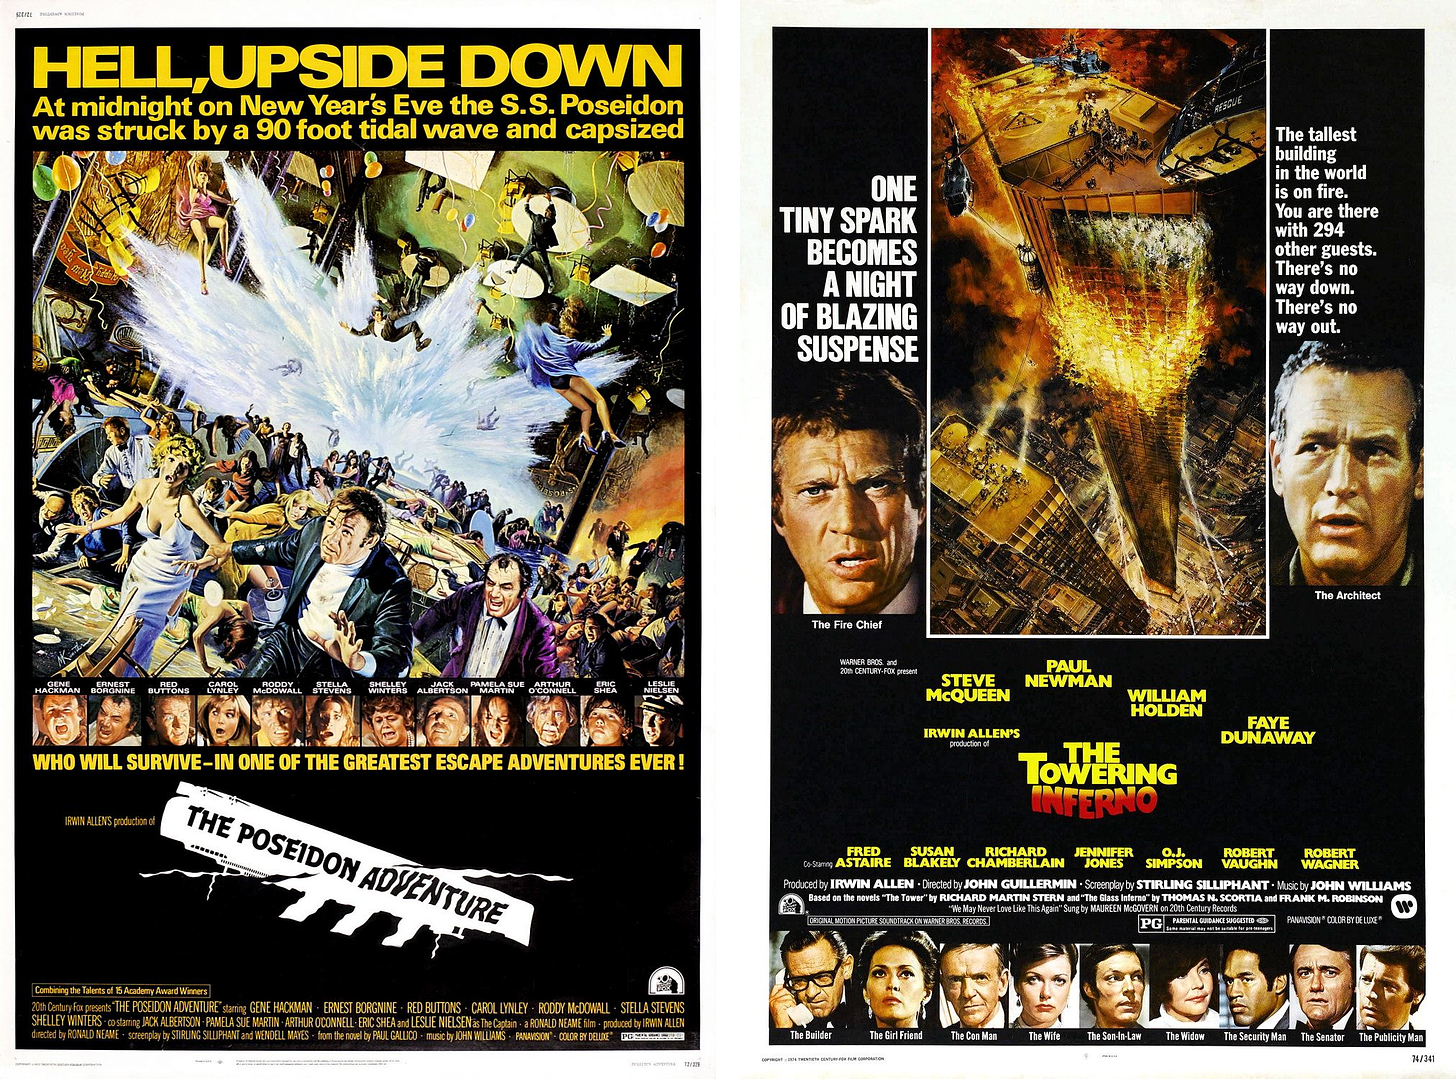 The “Poseidon adventure” and “Towering inferno” film posters, courtesy of IMP Awards.